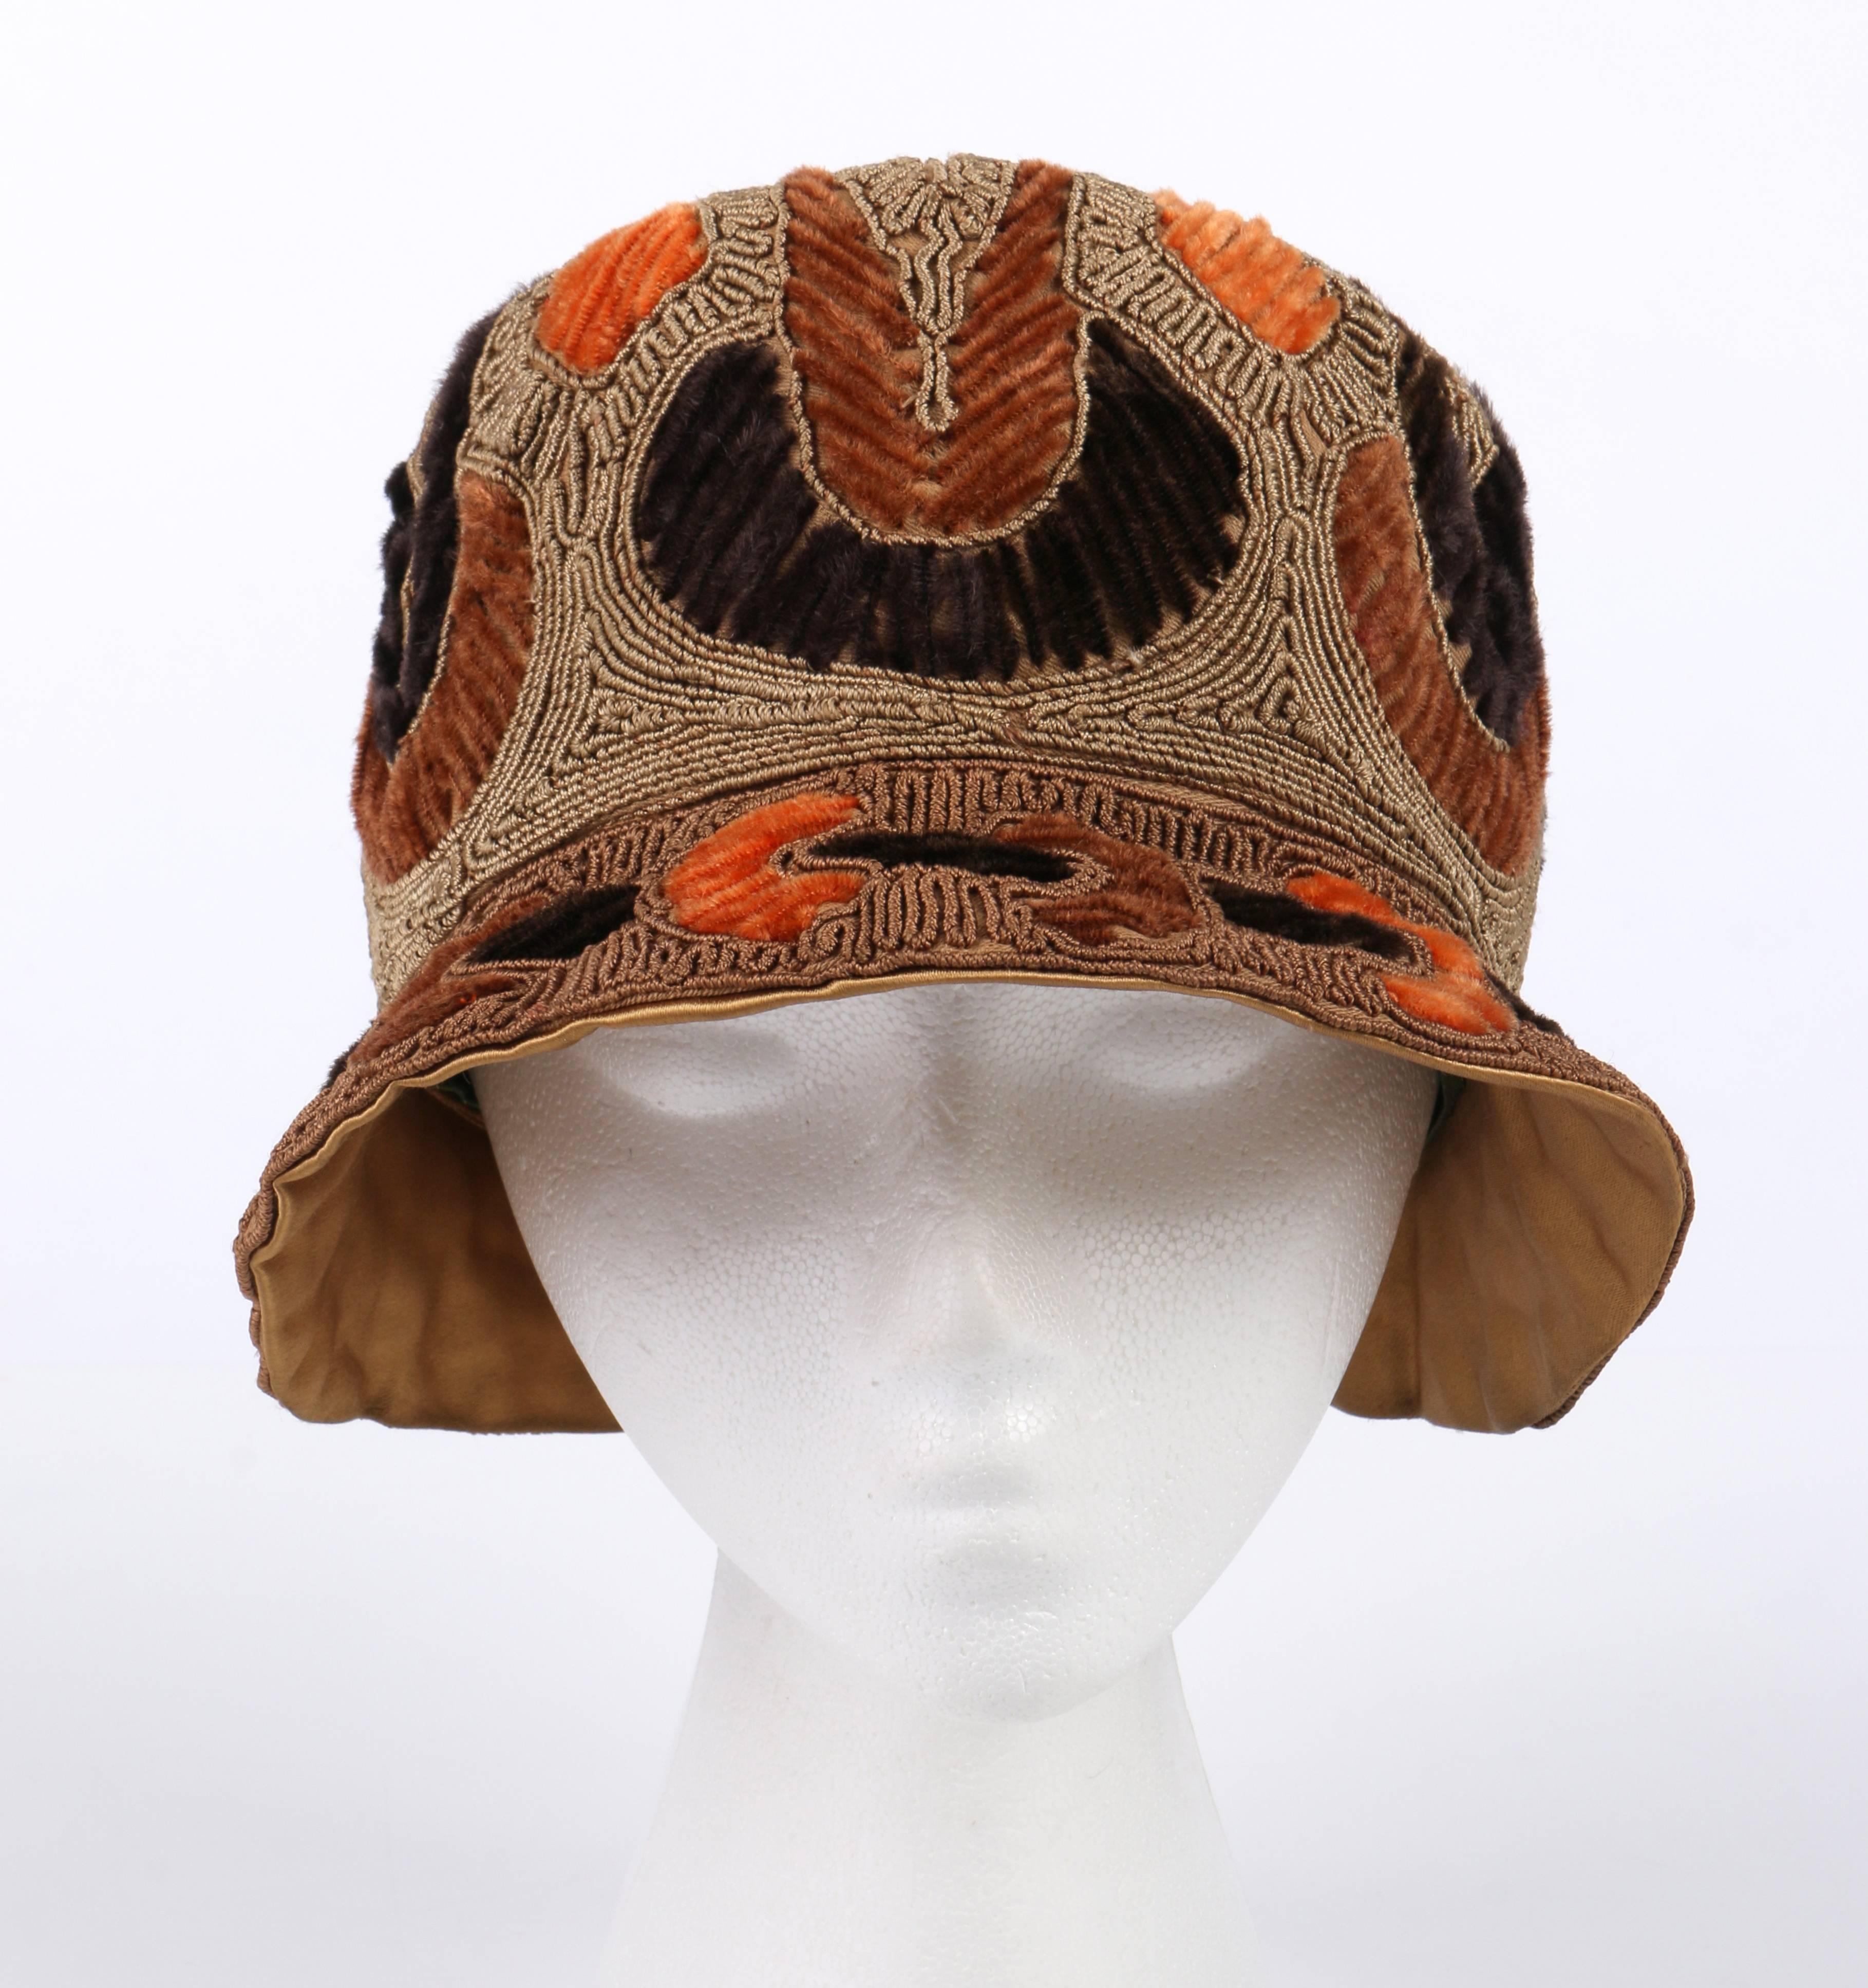 Vintage couture c.1920's Rich Art Models by Felsenthal Hat Co. gold and bronze heavily corded/embroidered flapper cloche hat. Heavily embellished with gold bullion thread on body and bronze bullion thread on brim. Brown, dark brown and orange